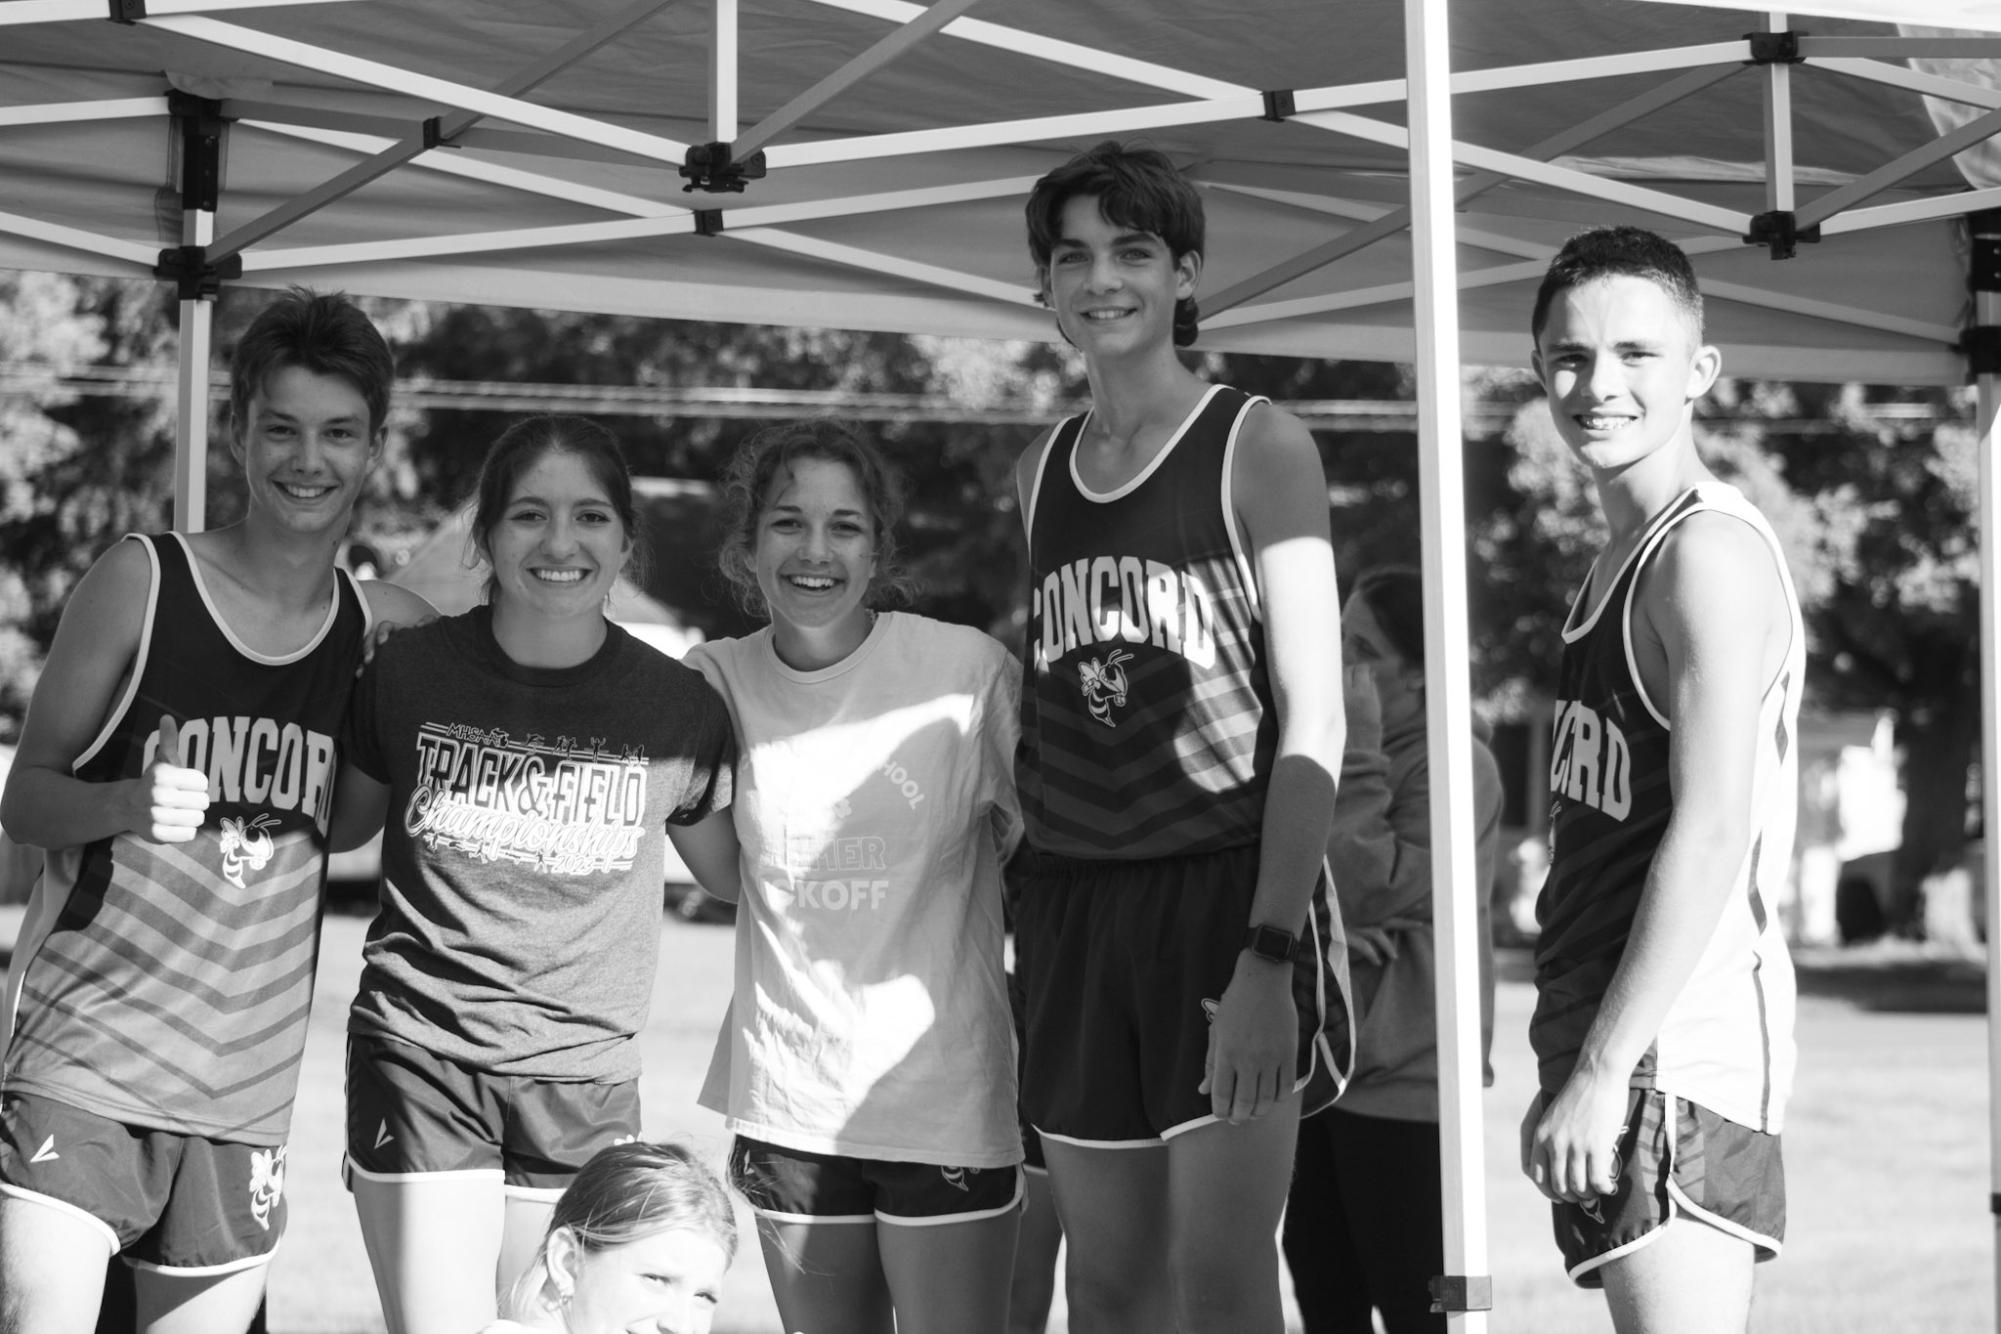 Concord Cross Country: A race to the finish